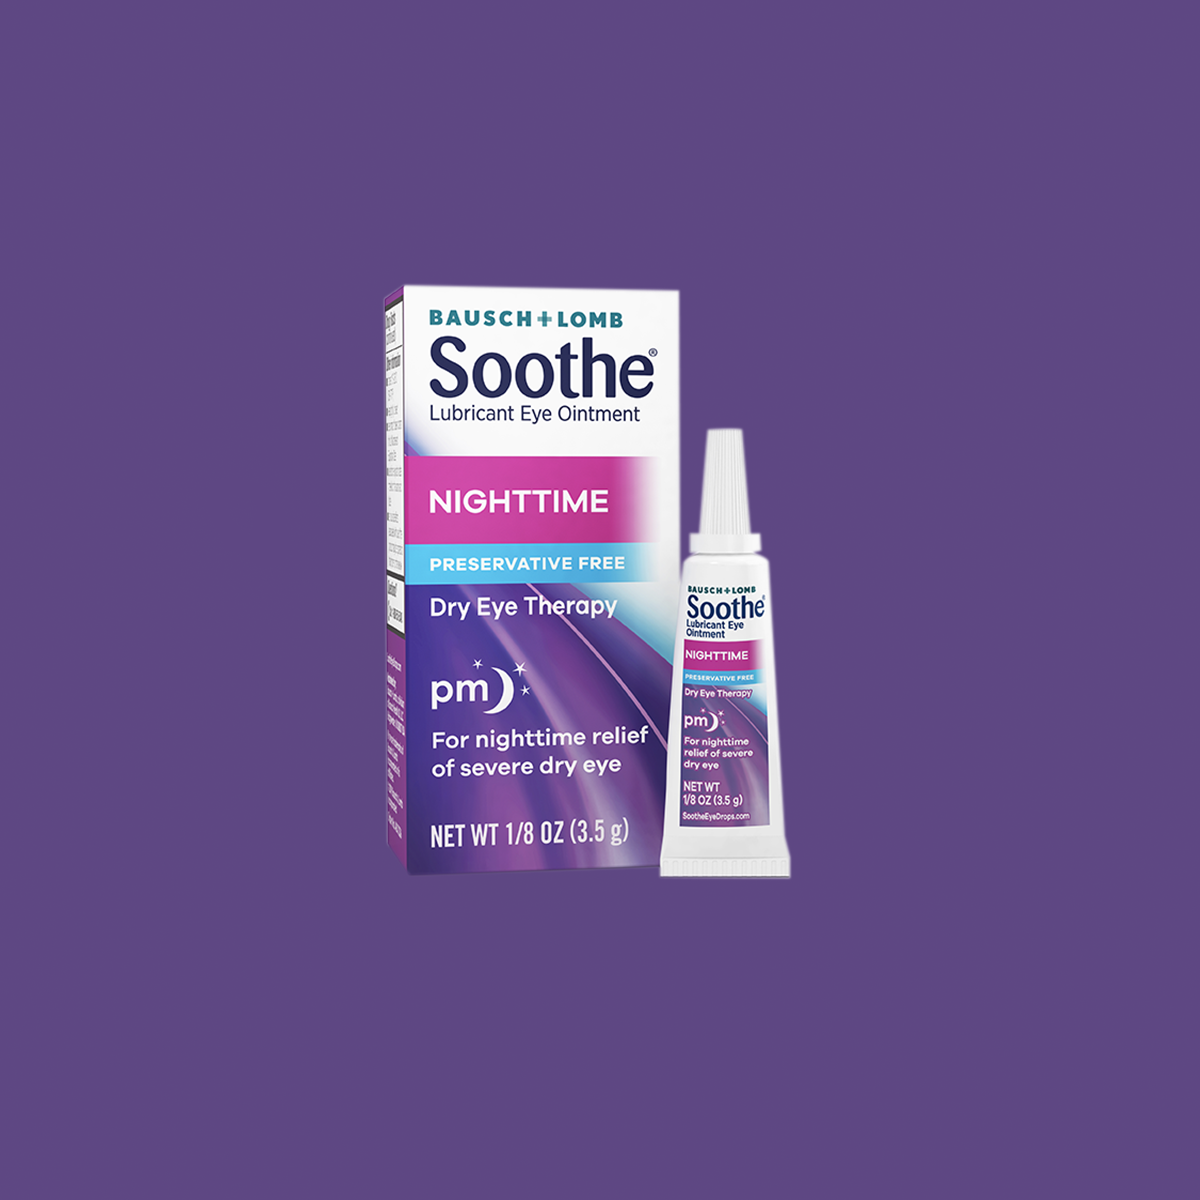 Soothe Eye Ointment by Bausch & Lomb, Lubricant Relief for Dry Eyes, Nighttime Dry Eye Therapy, Sensitive Eyes, Preservative Free, (1.8 Oz tube)